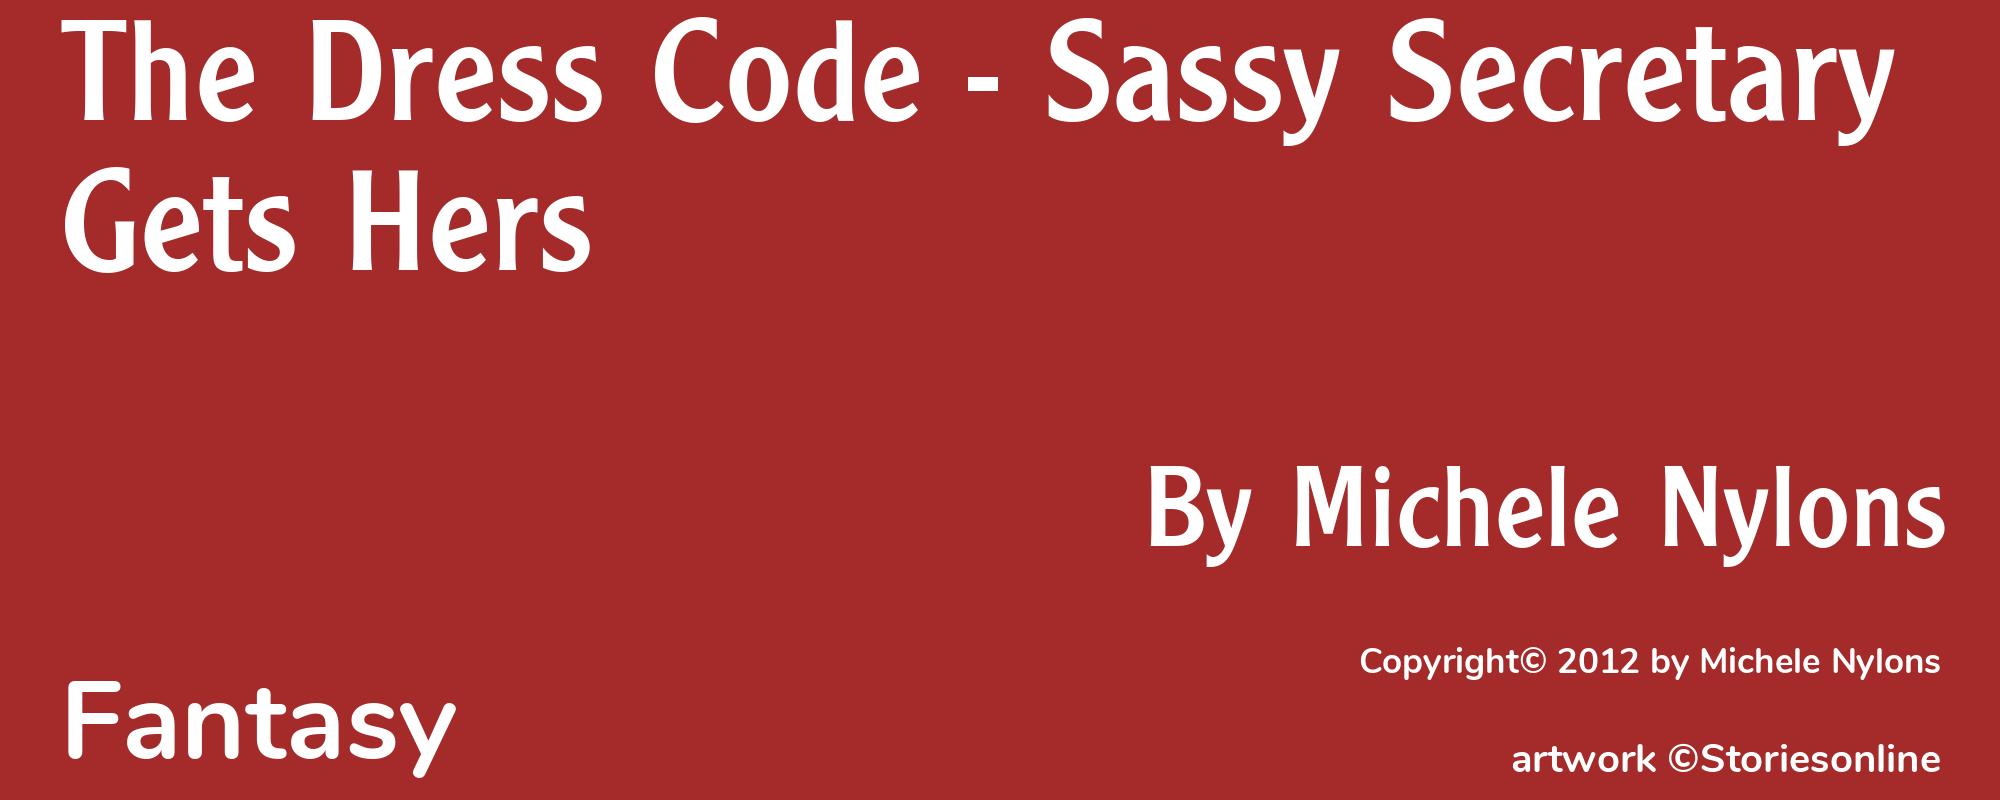 The Dress Code - Sassy Secretary Gets Hers - Cover